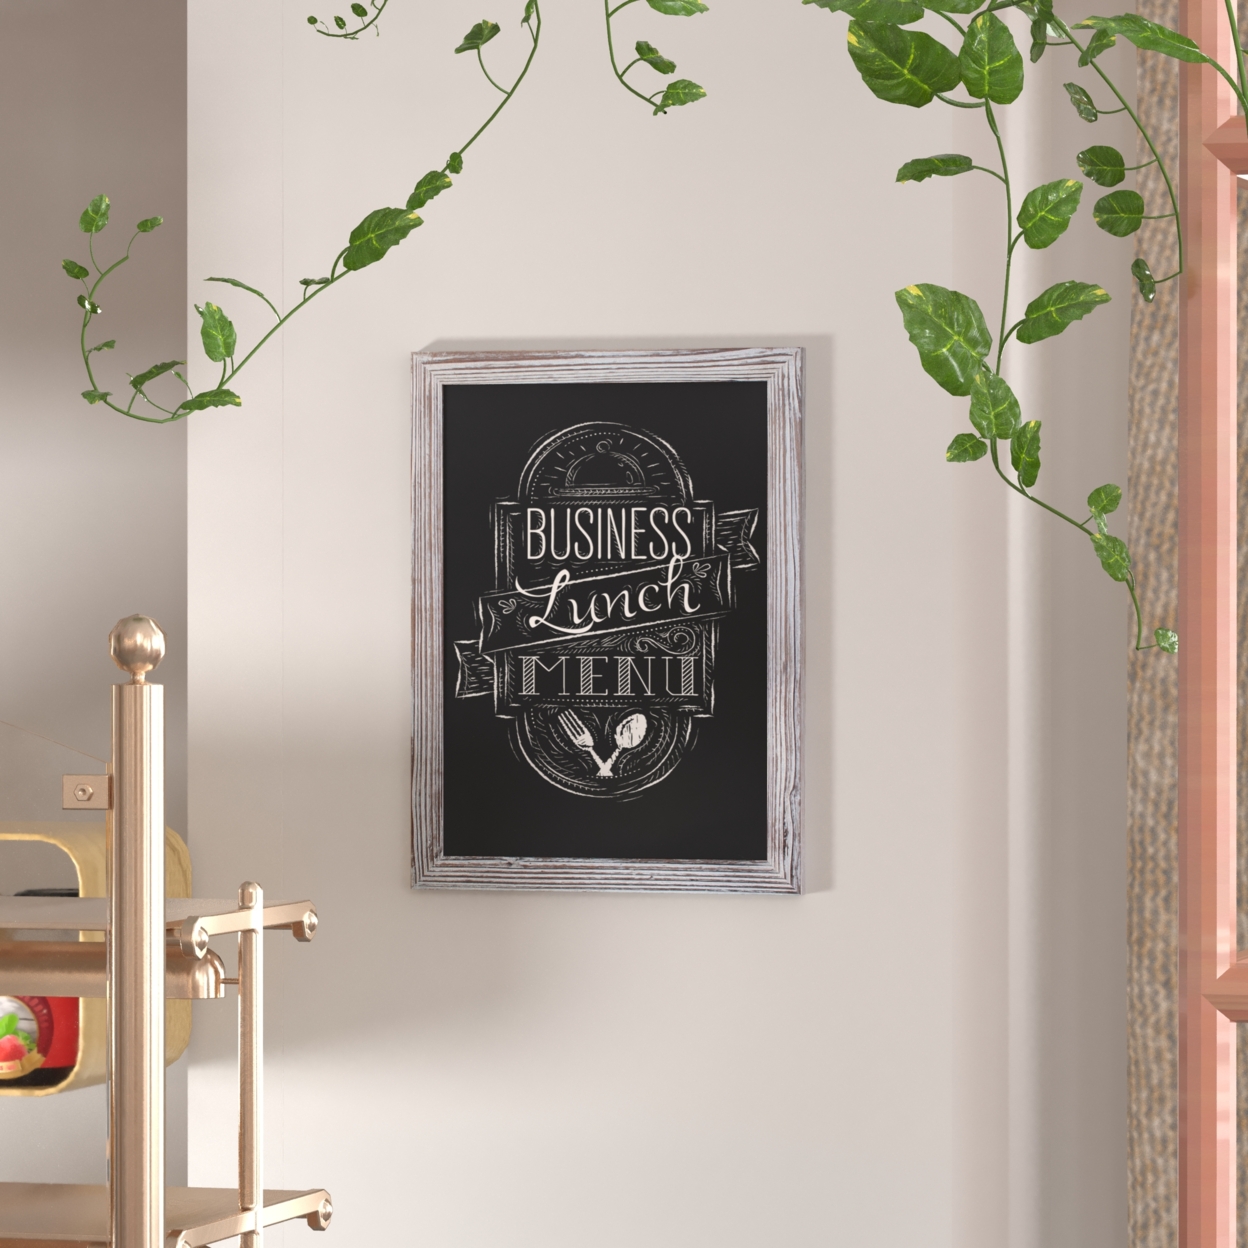 24 Inch Wall Hanging Magnetic Chalkboard, Pine Wood Frame, Whitewashed